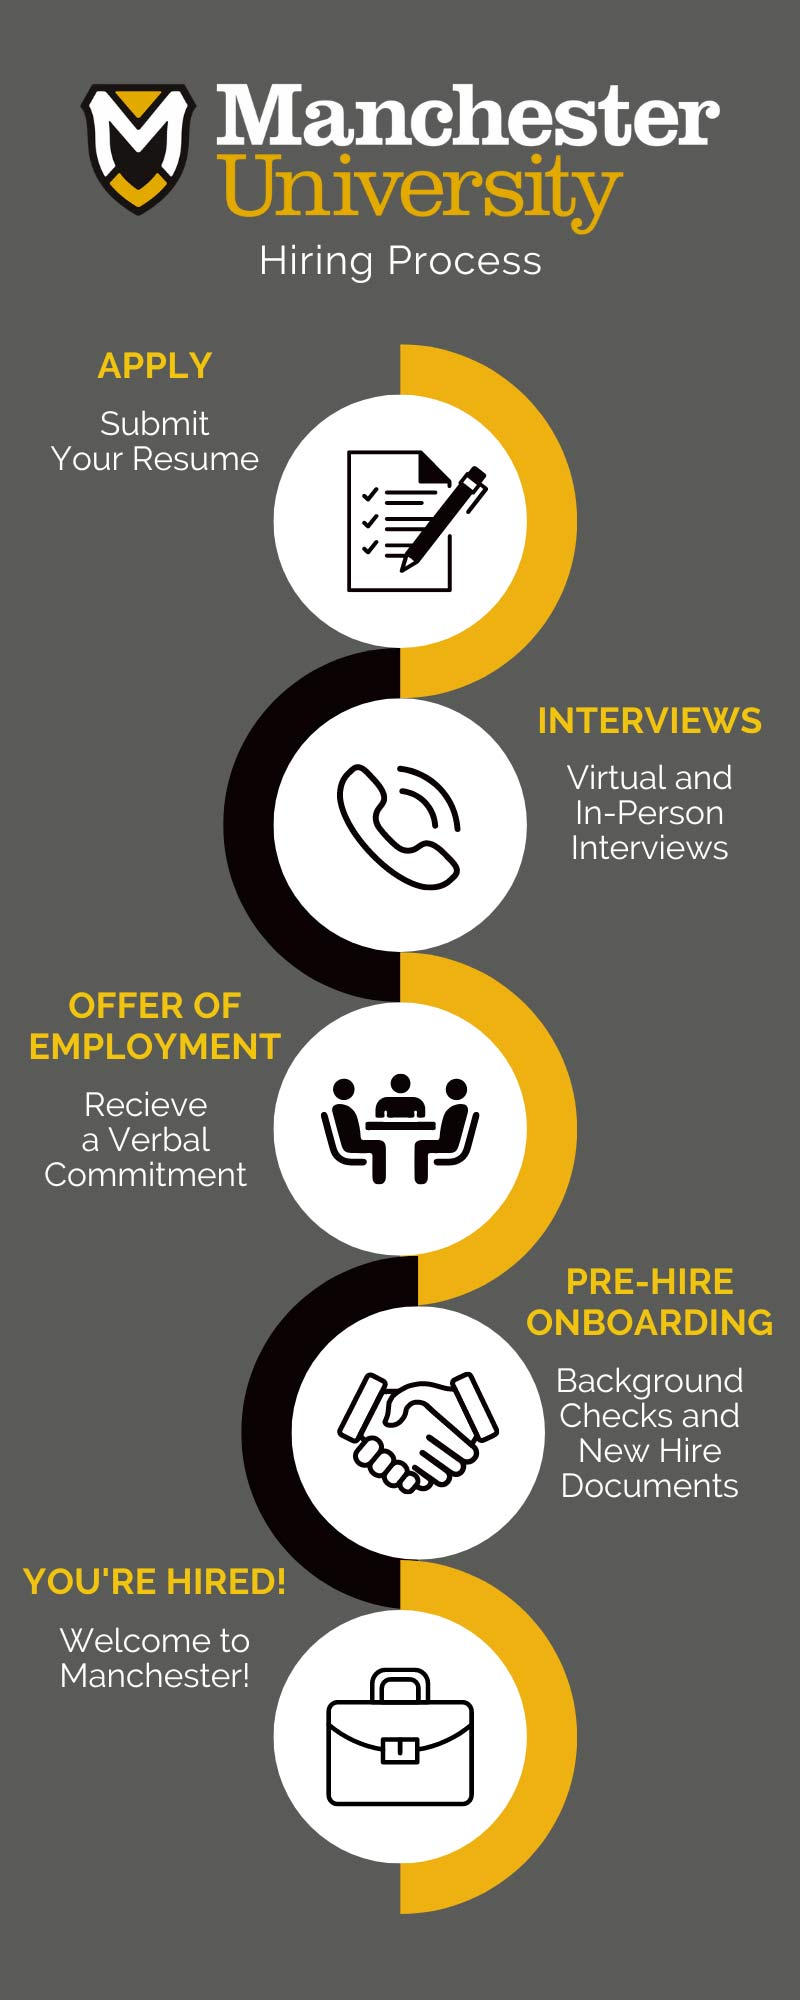 View our Info Graphic of the MU Hiring Process